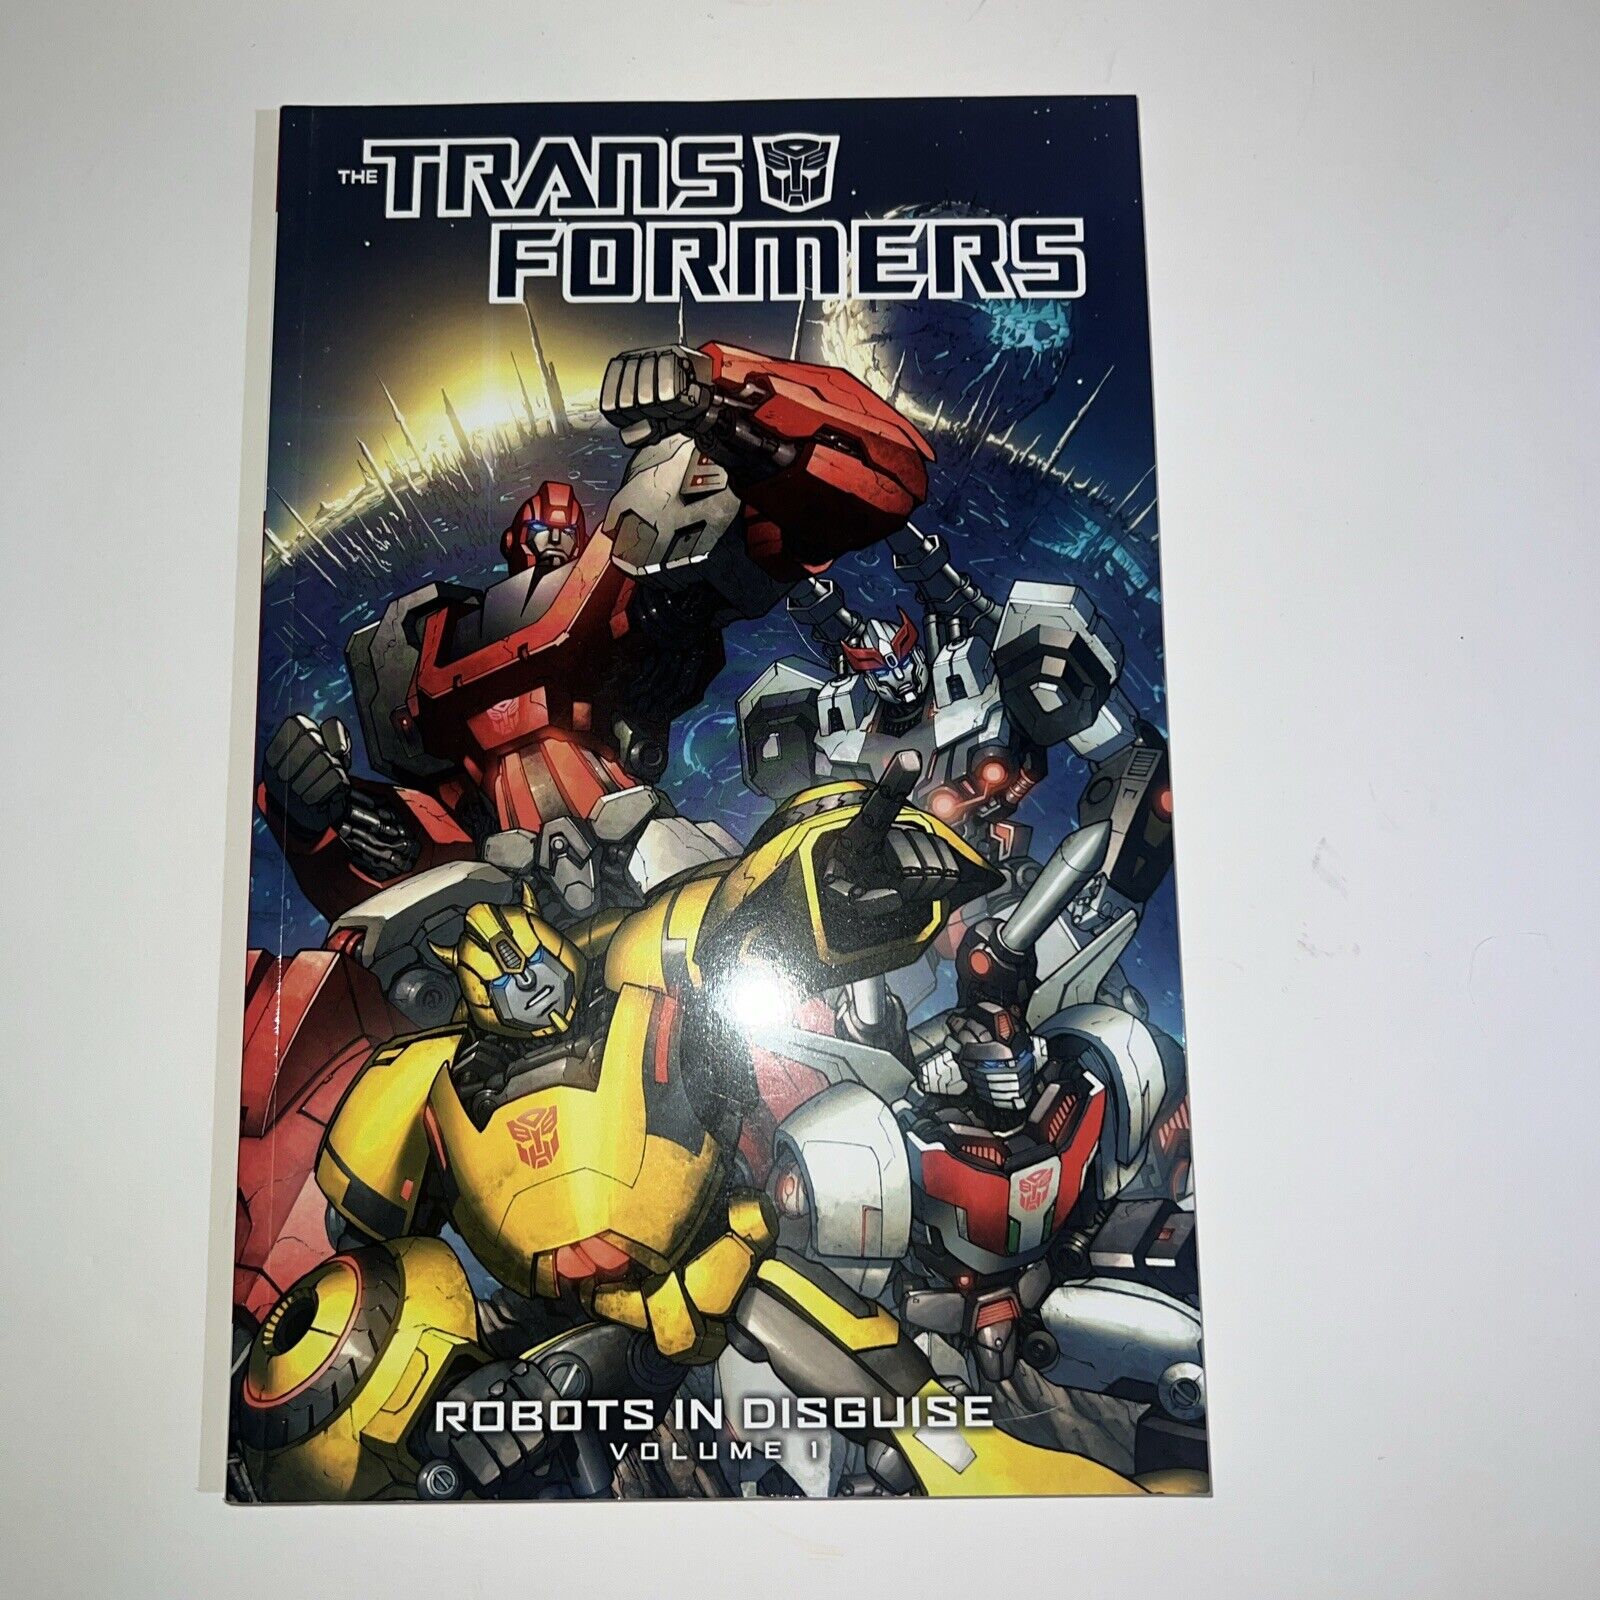 The Transformers: Robots in Disguise #1 (IDW Publishing) 2012 TPB